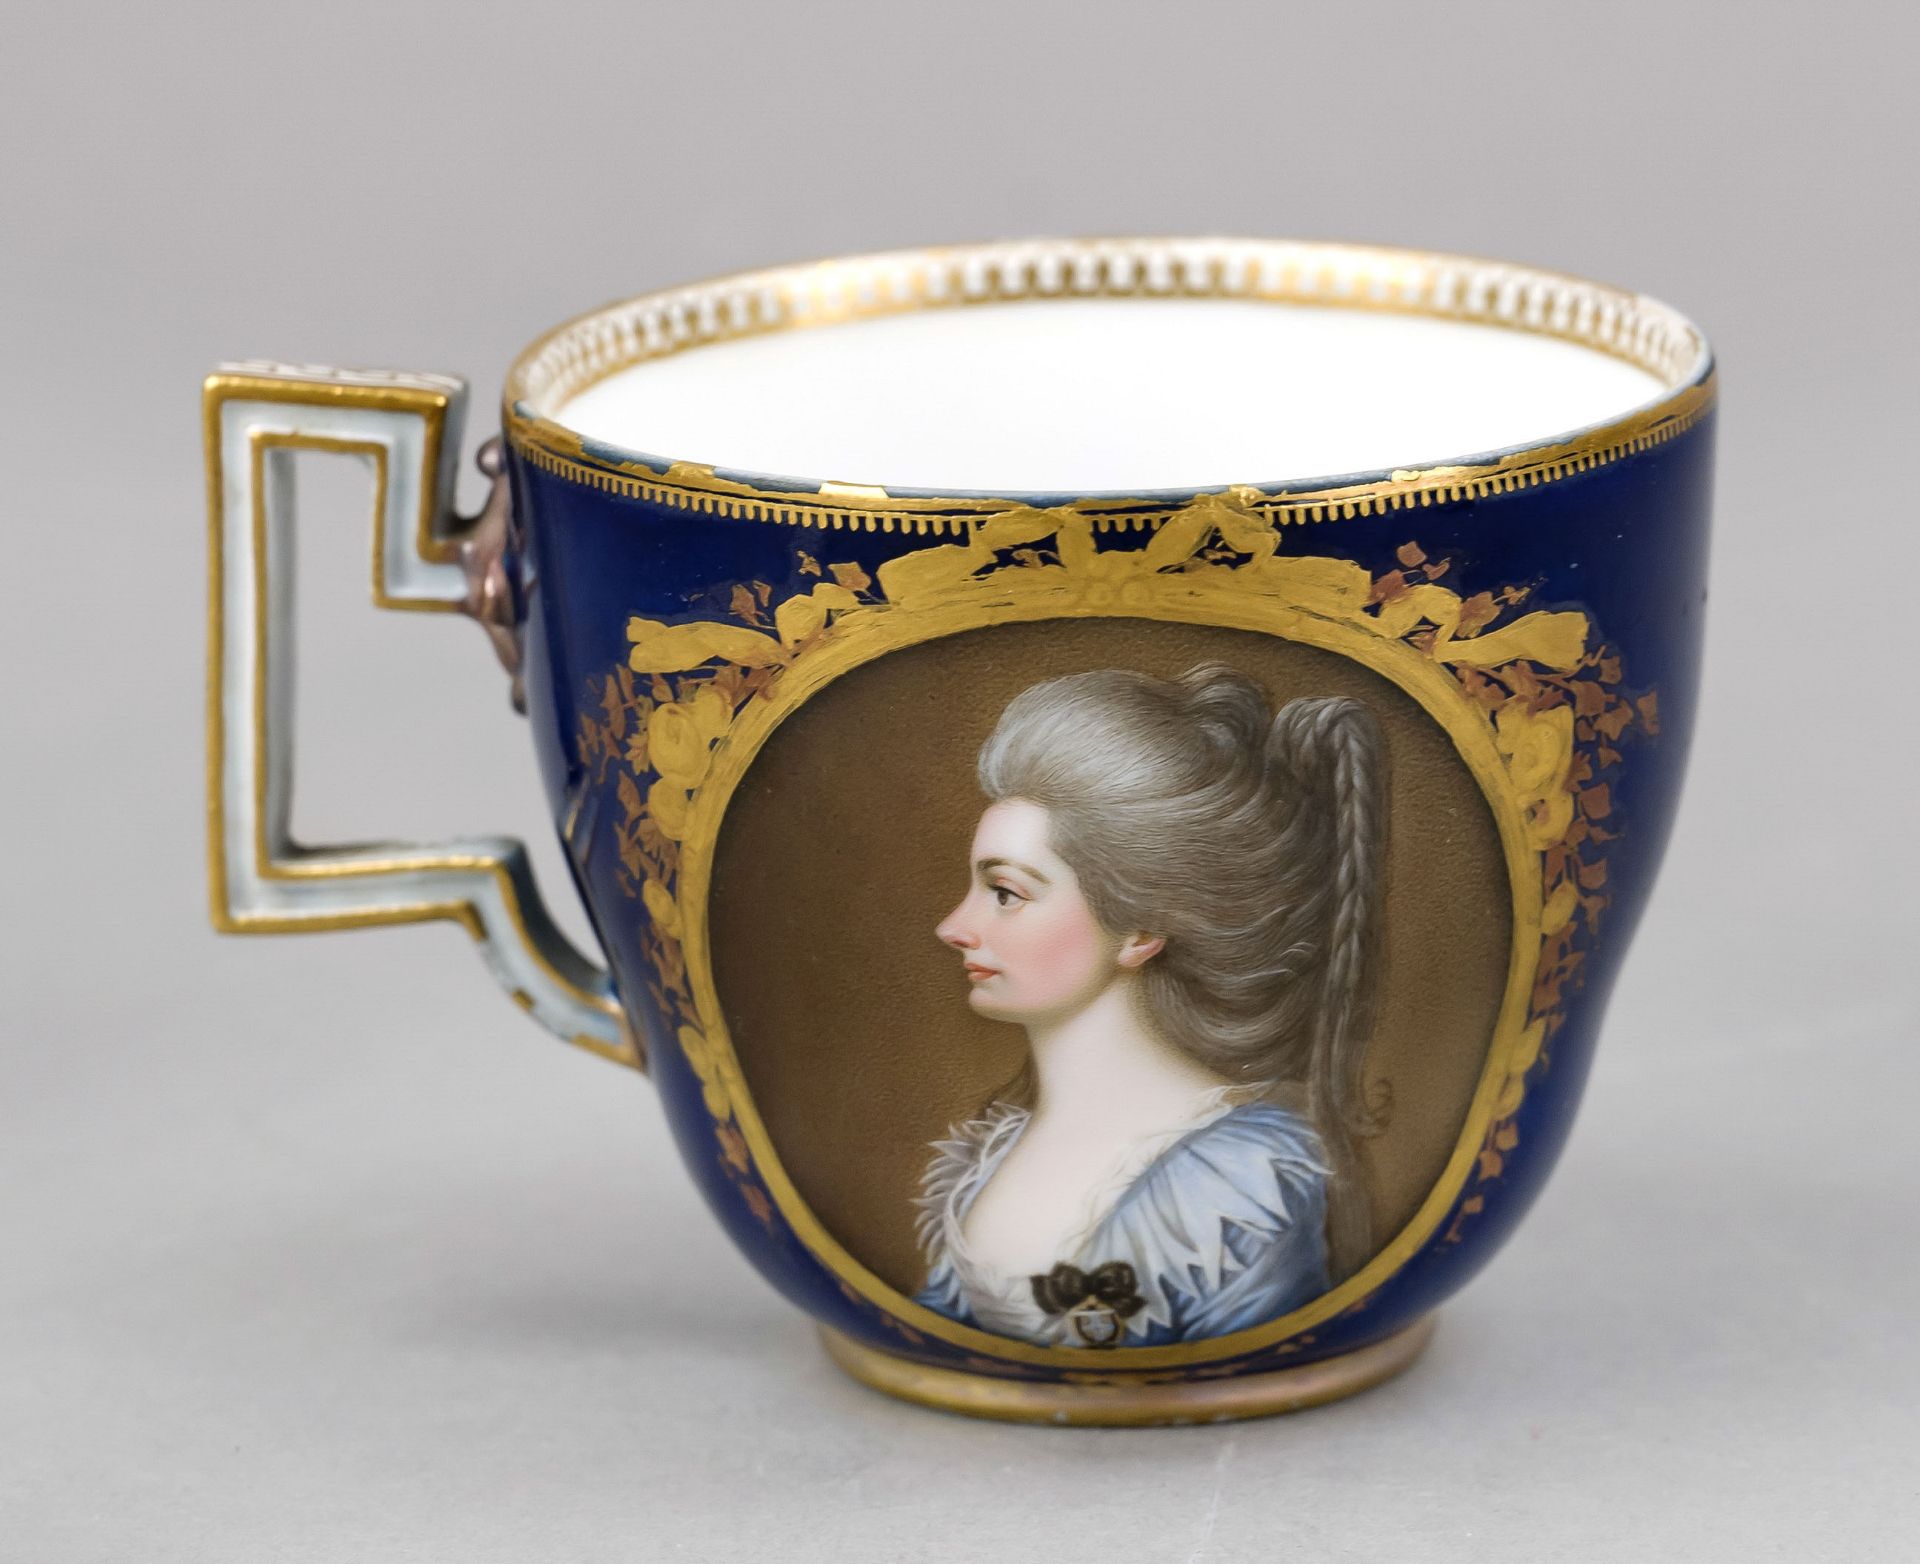 An important lidded cup and saucer, Meissen, Marcolini mark with numeral 4, 1st choice, c. 1778. - Image 5 of 6